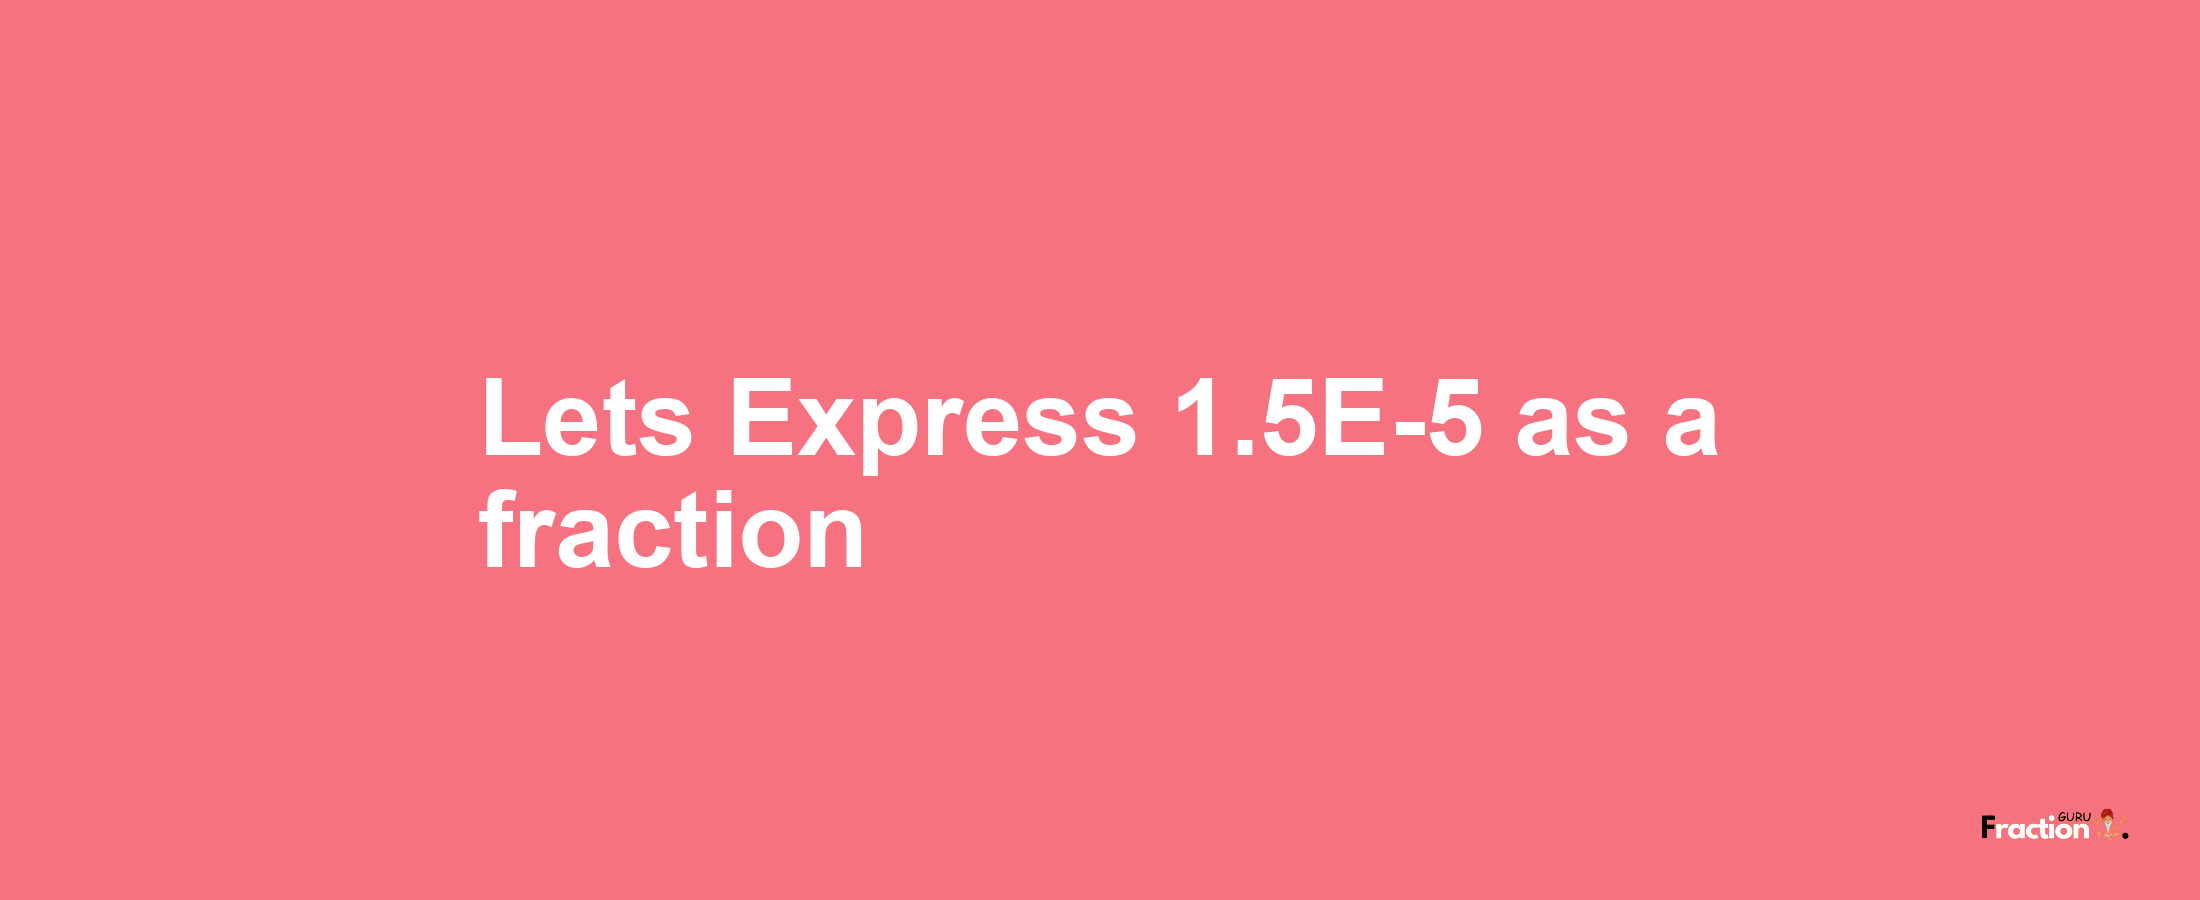 Lets Express 1.5E-5 as afraction